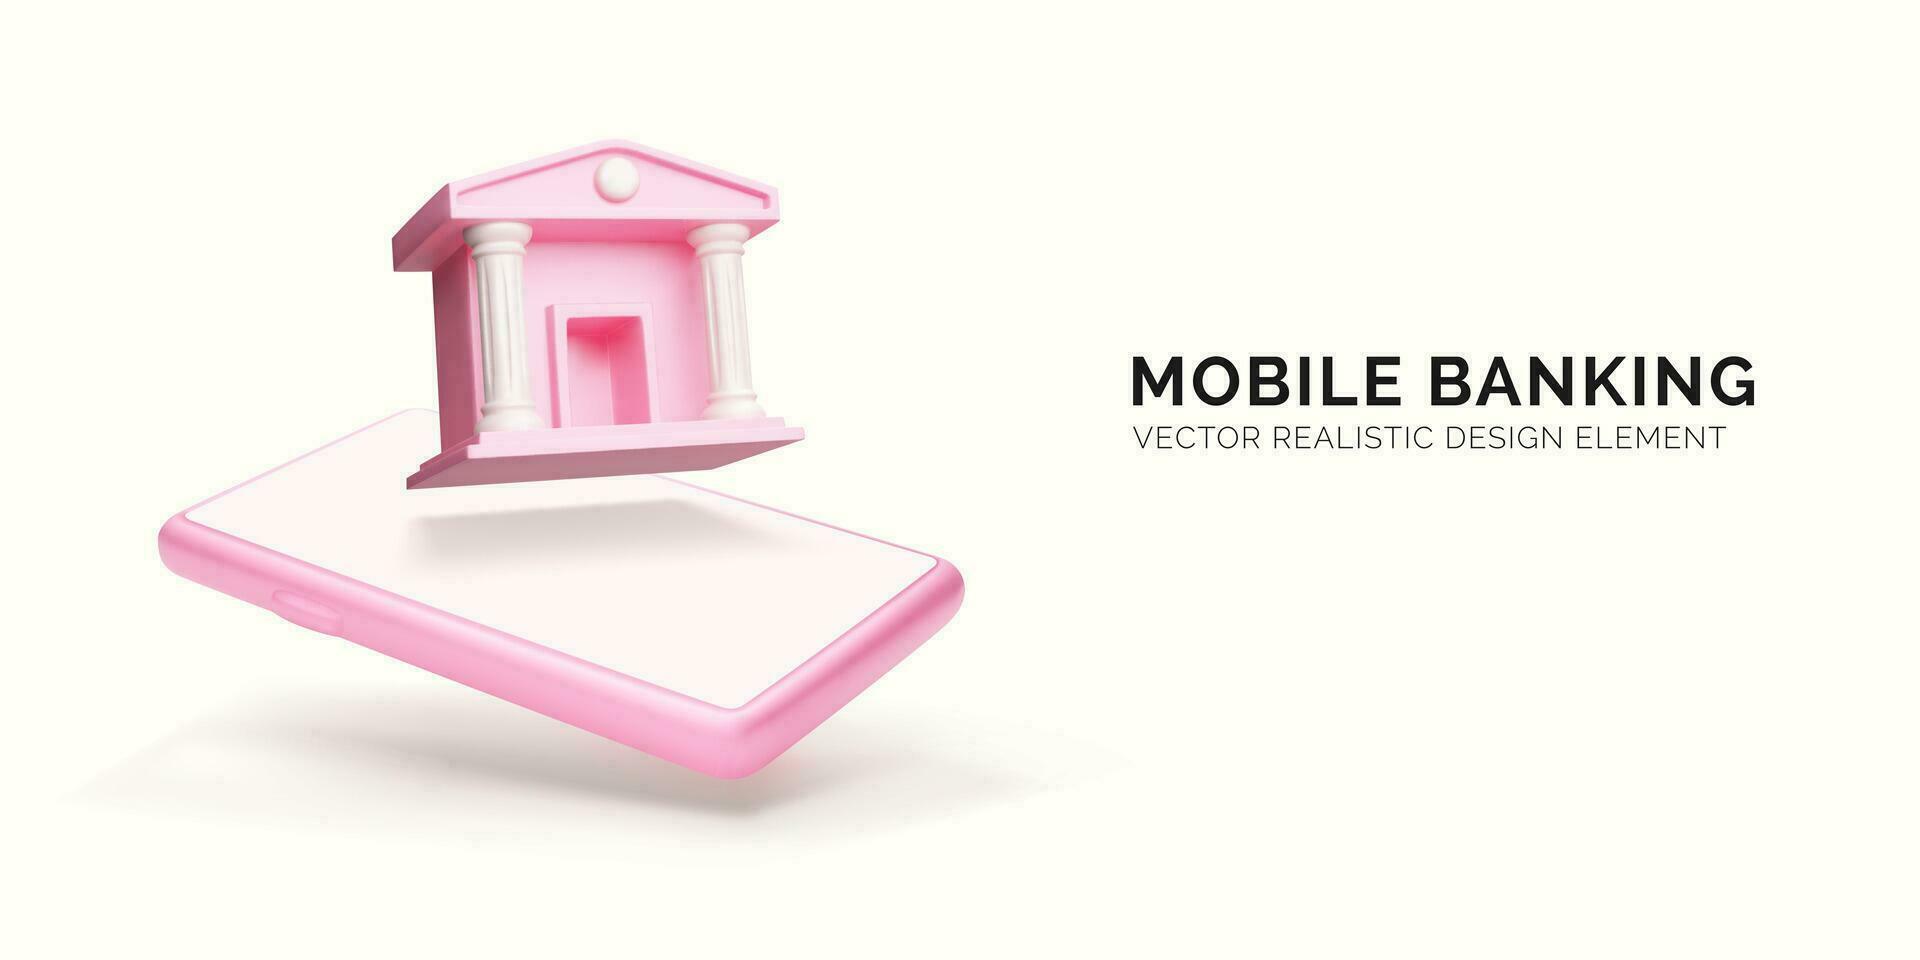 Mobile banking concept in pink colors. 3d realistic business object. Mobile phone and bank architecture on phone screen. Vector illustration